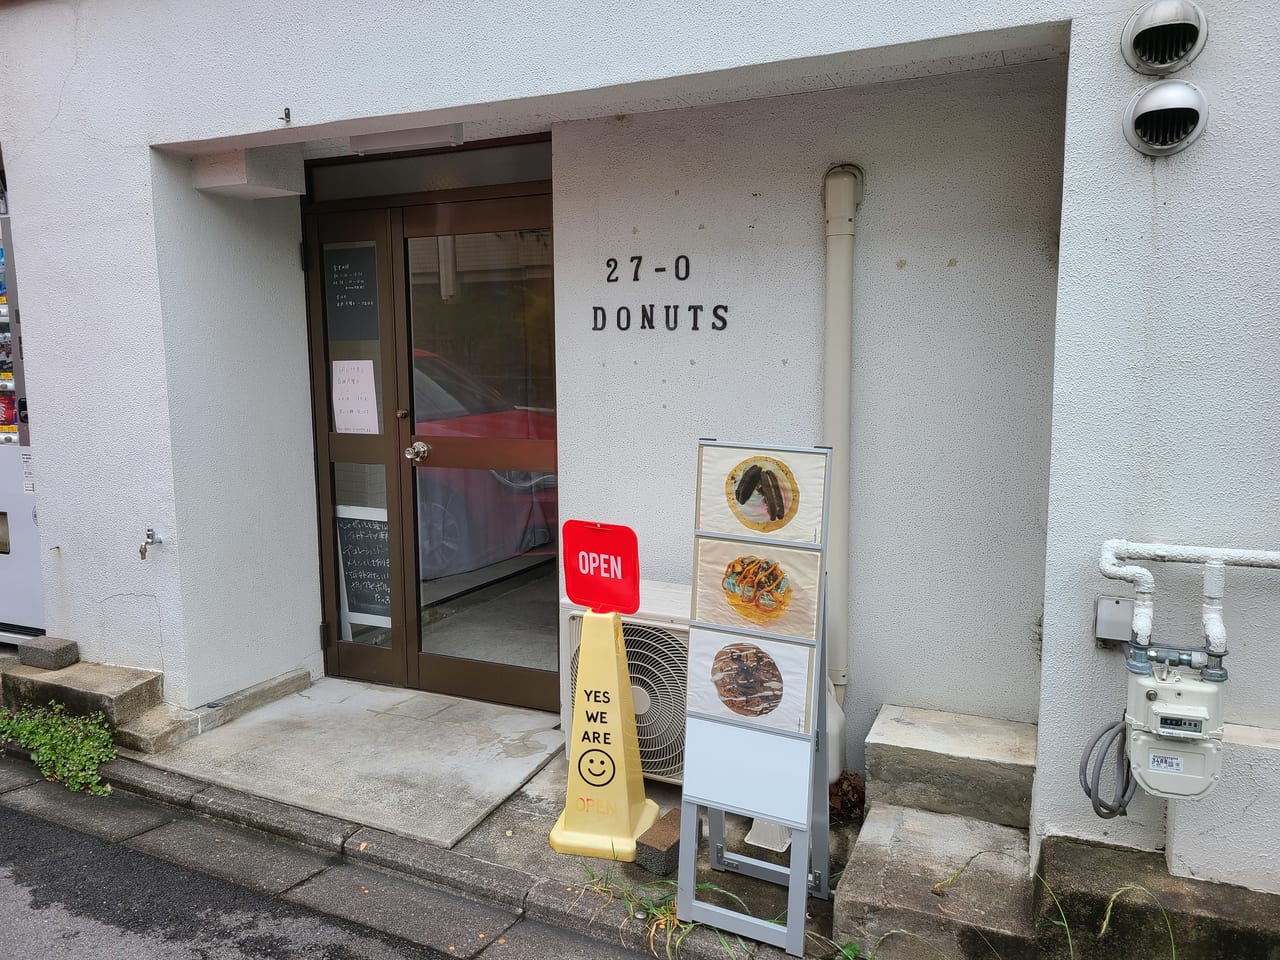 TWO SEVEN-O DONUTS